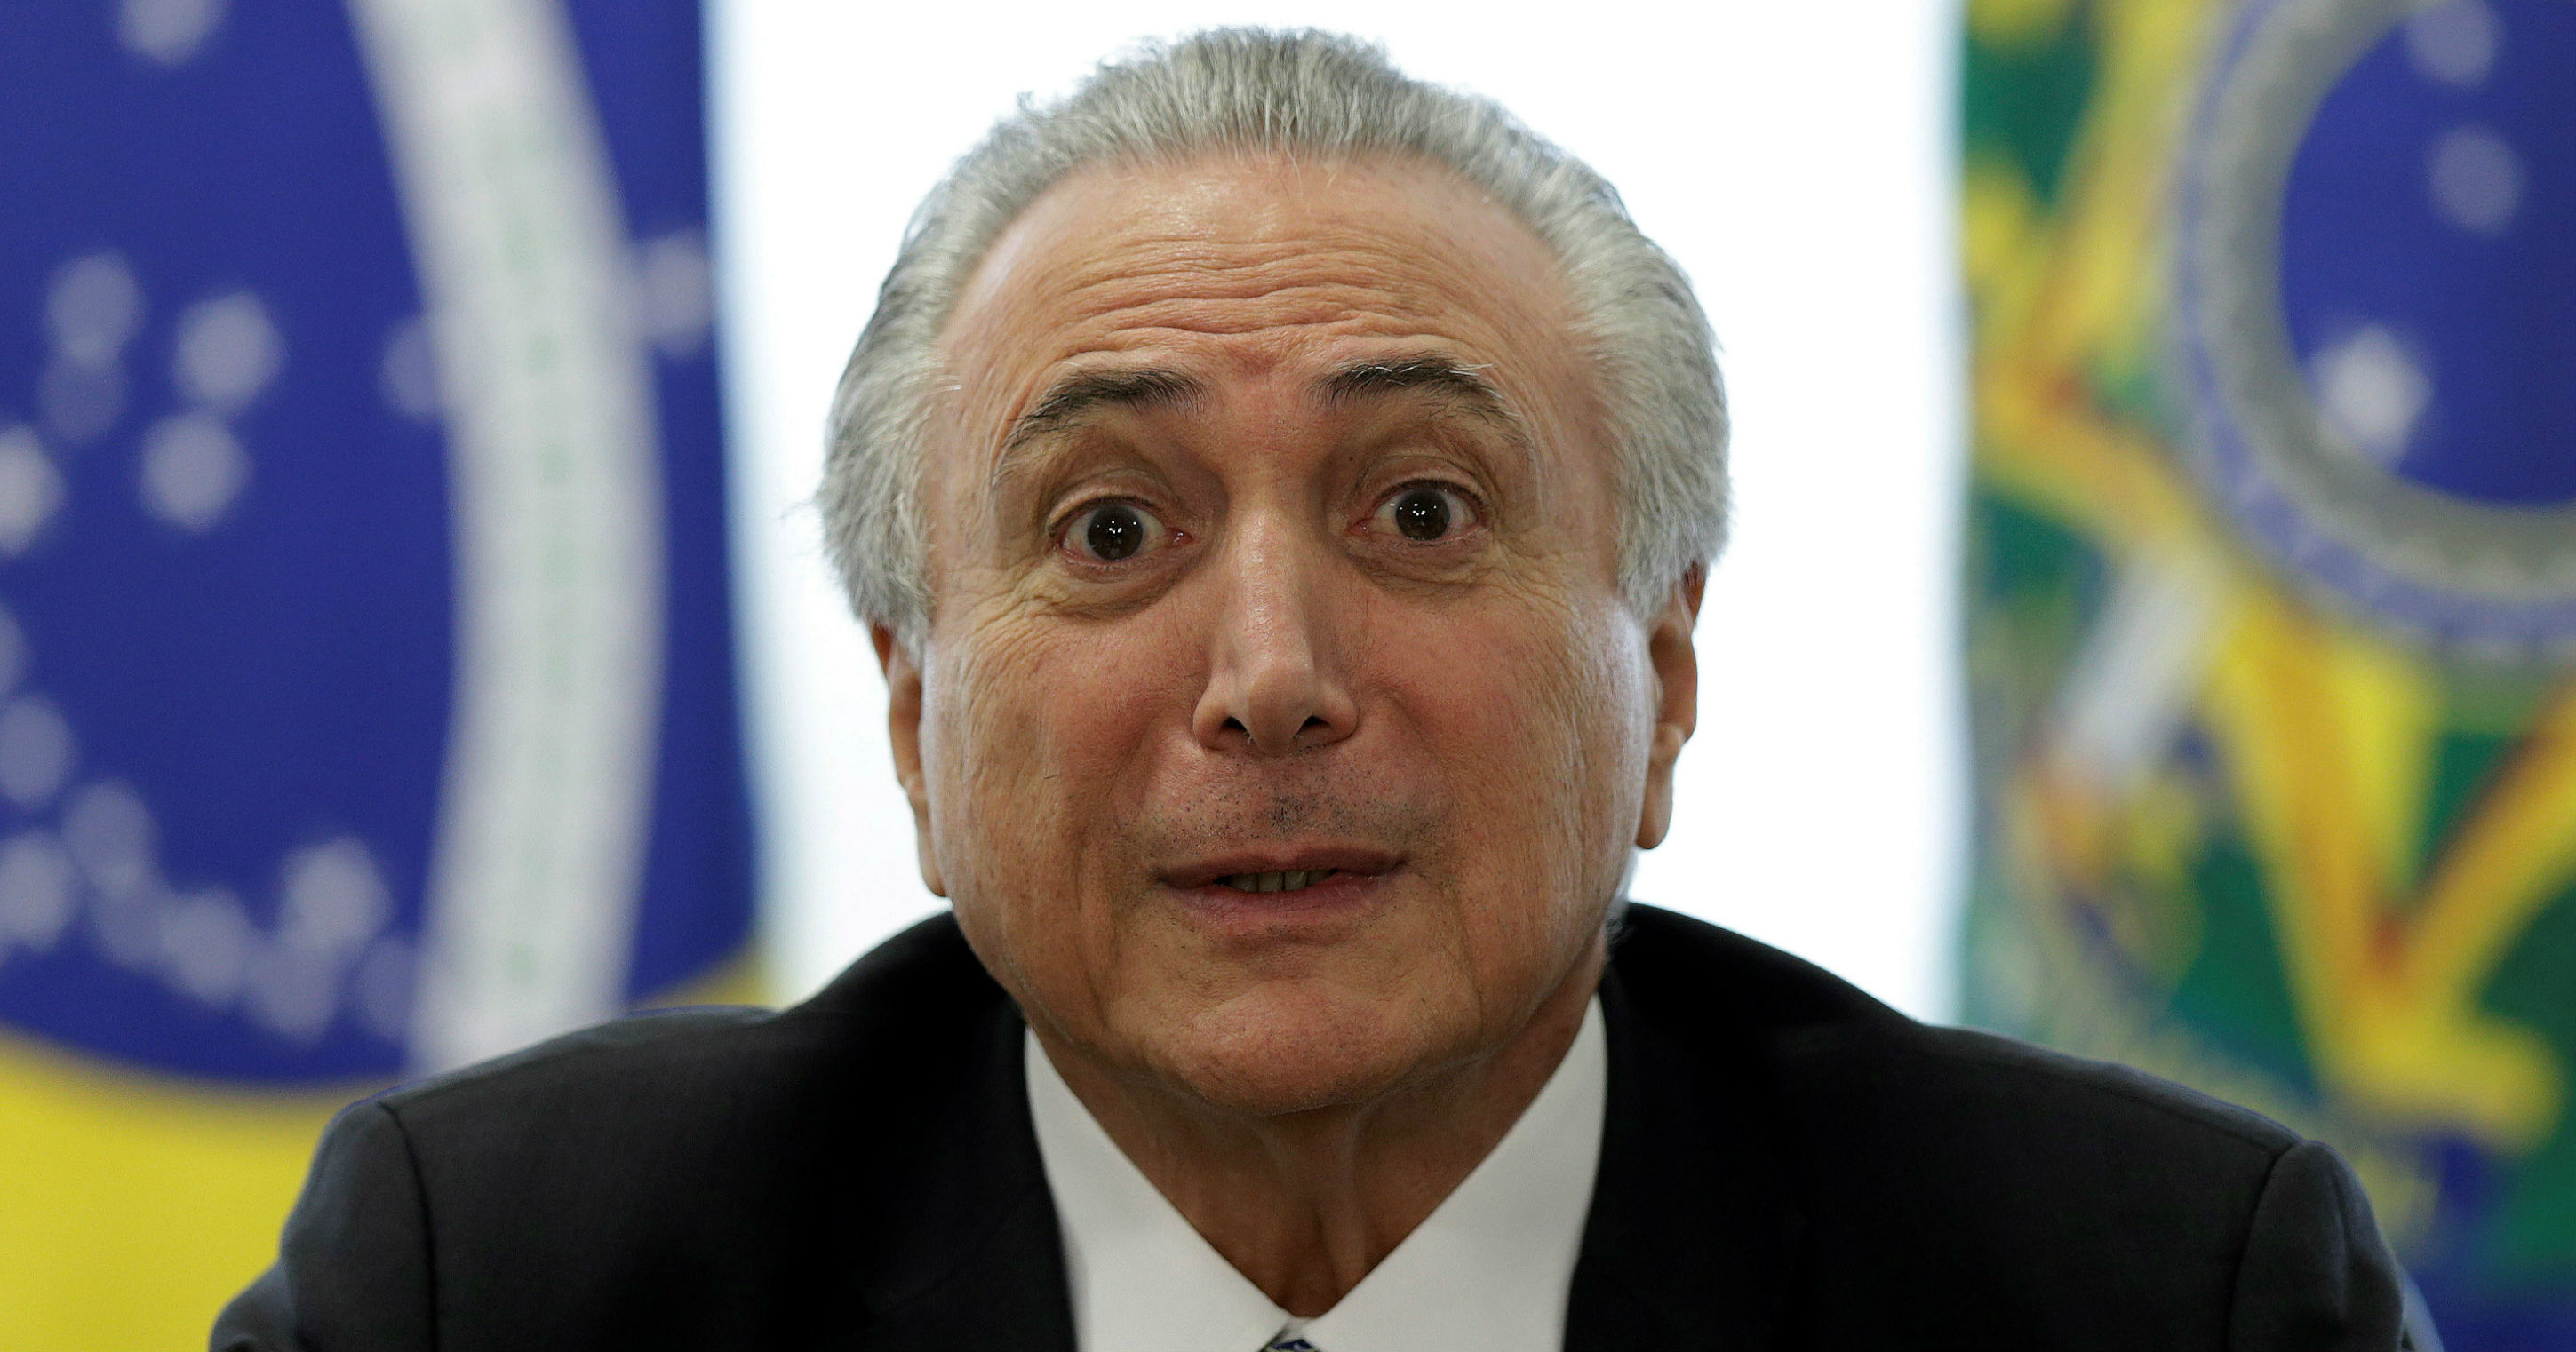 Brazil's interim President Michel Temer reacts during a meeting with leaders of the Allied Base of parties in the Chamber of Deputies, at the Planalto Palace in Brasilia, Brazil, May 17, 2016.